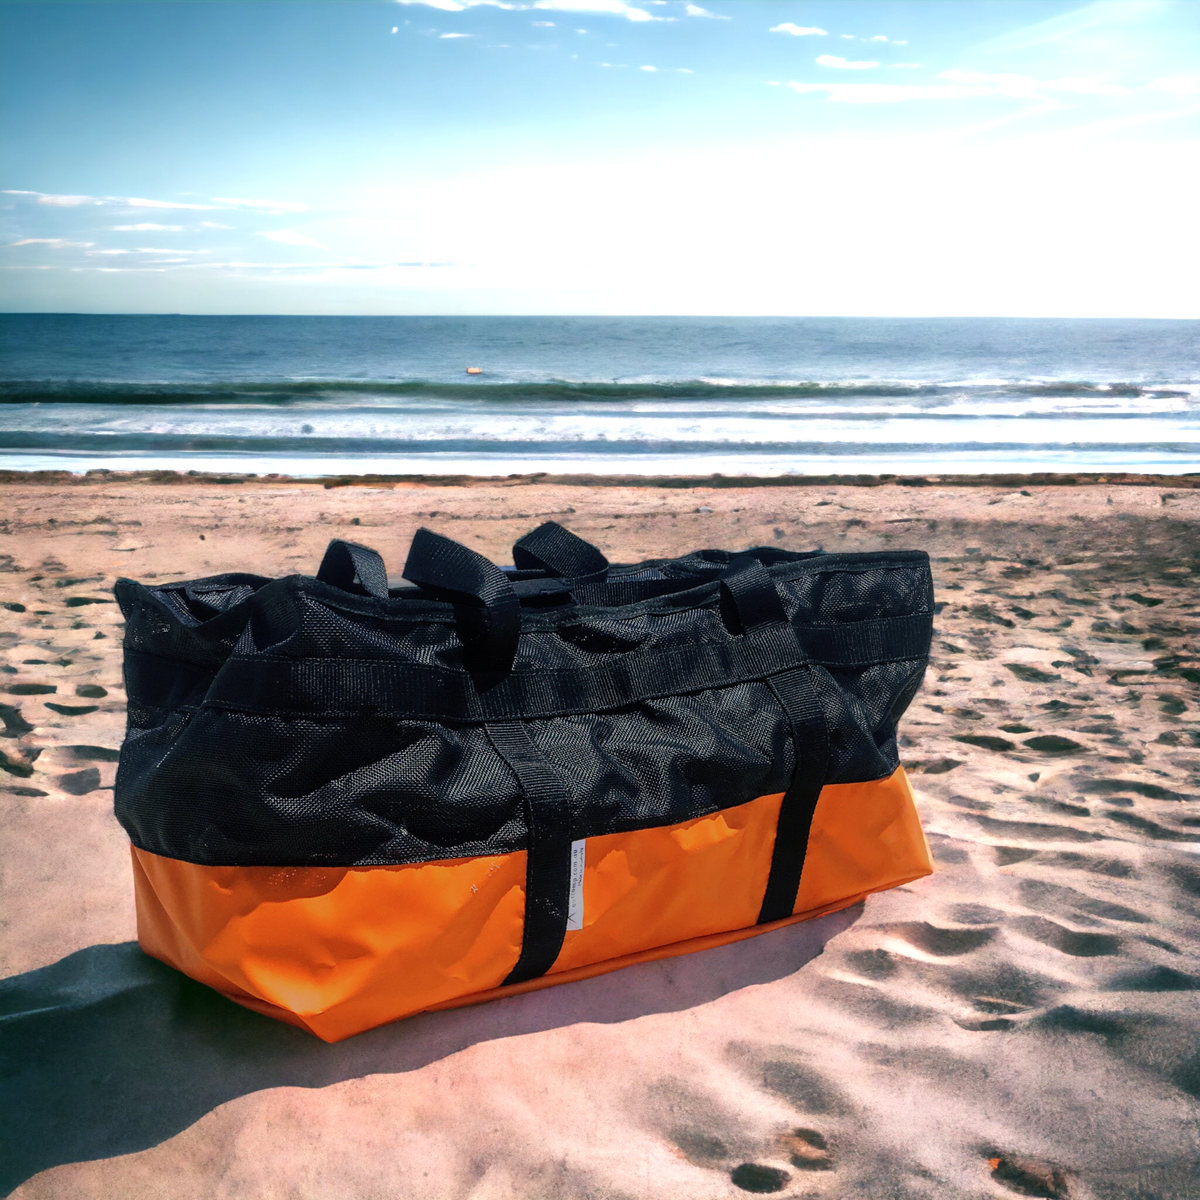 Watersports gear bag with beach equipment inside